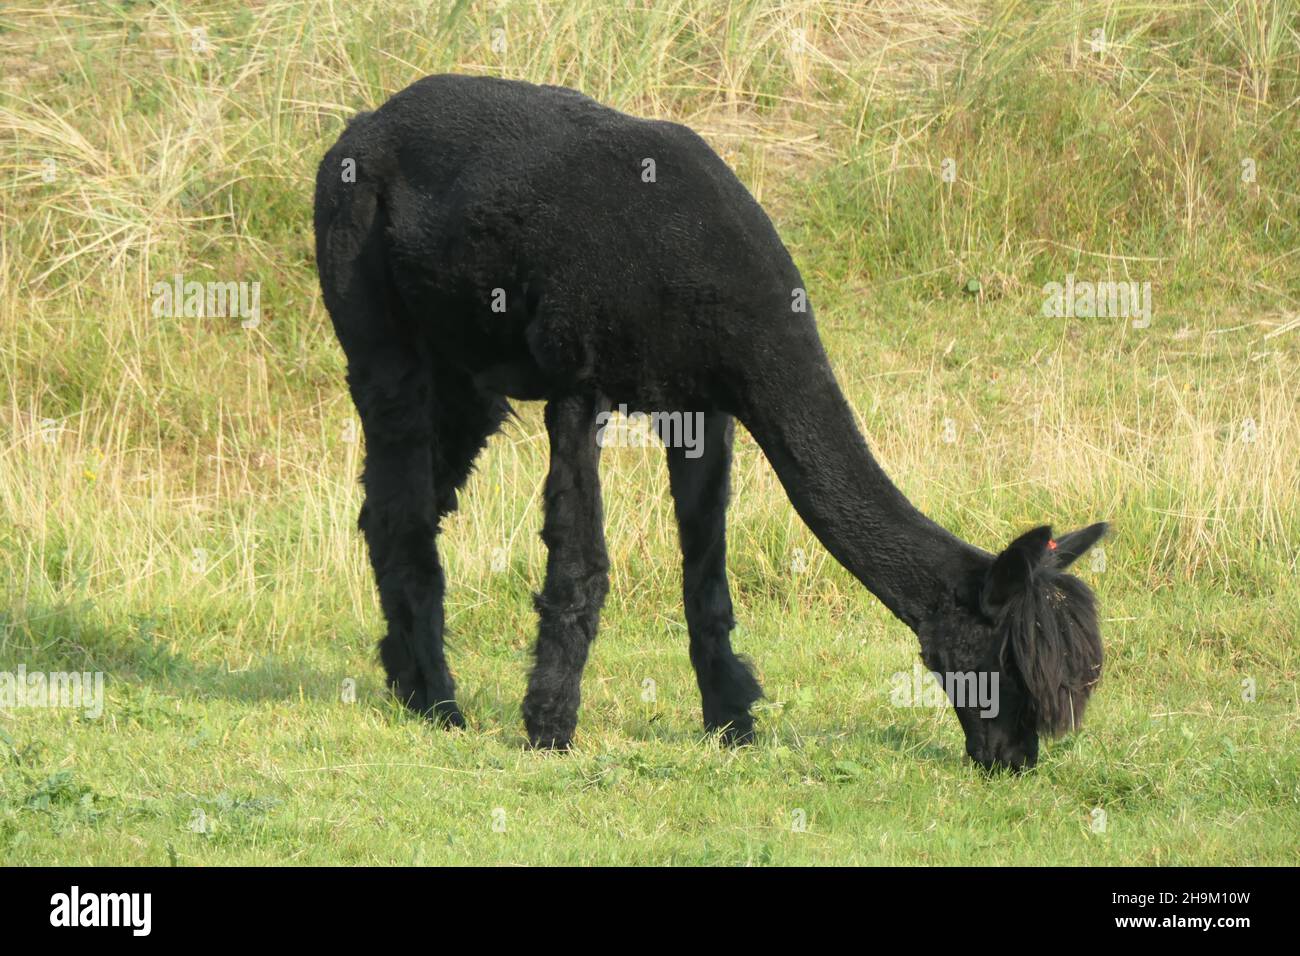 A black alpaca is grazing in the meadow. The mountain llama, seen from the side. Stock Photo